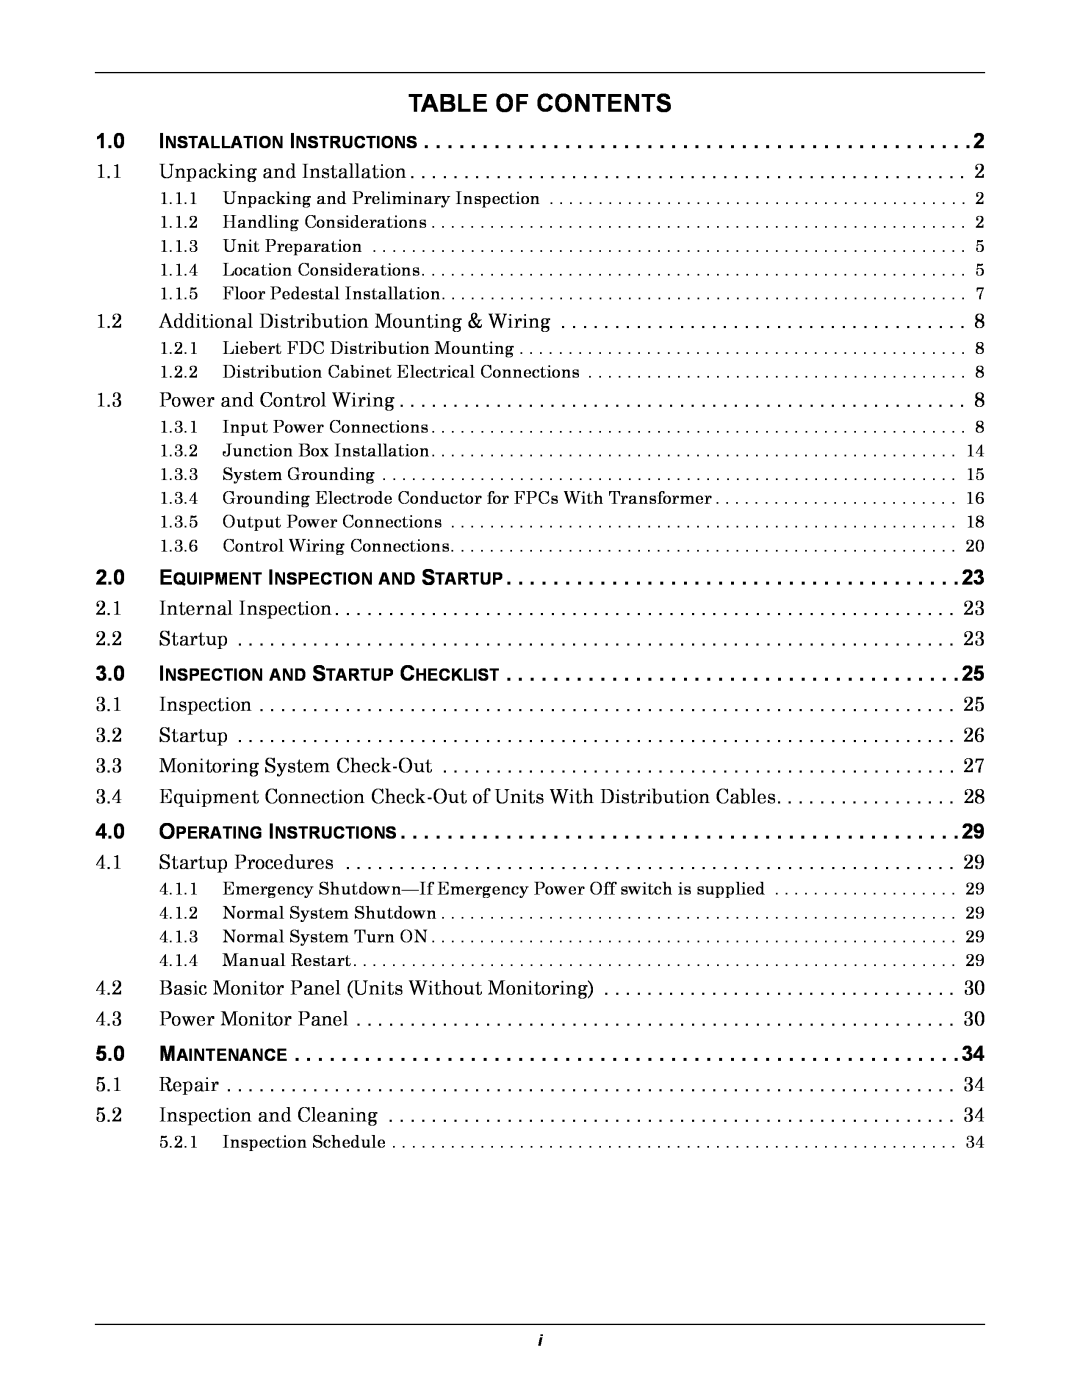 Emerson FPC Table Of Contents, Installation Instructions, Equipment Inspection And Startup, Operating Instructions 